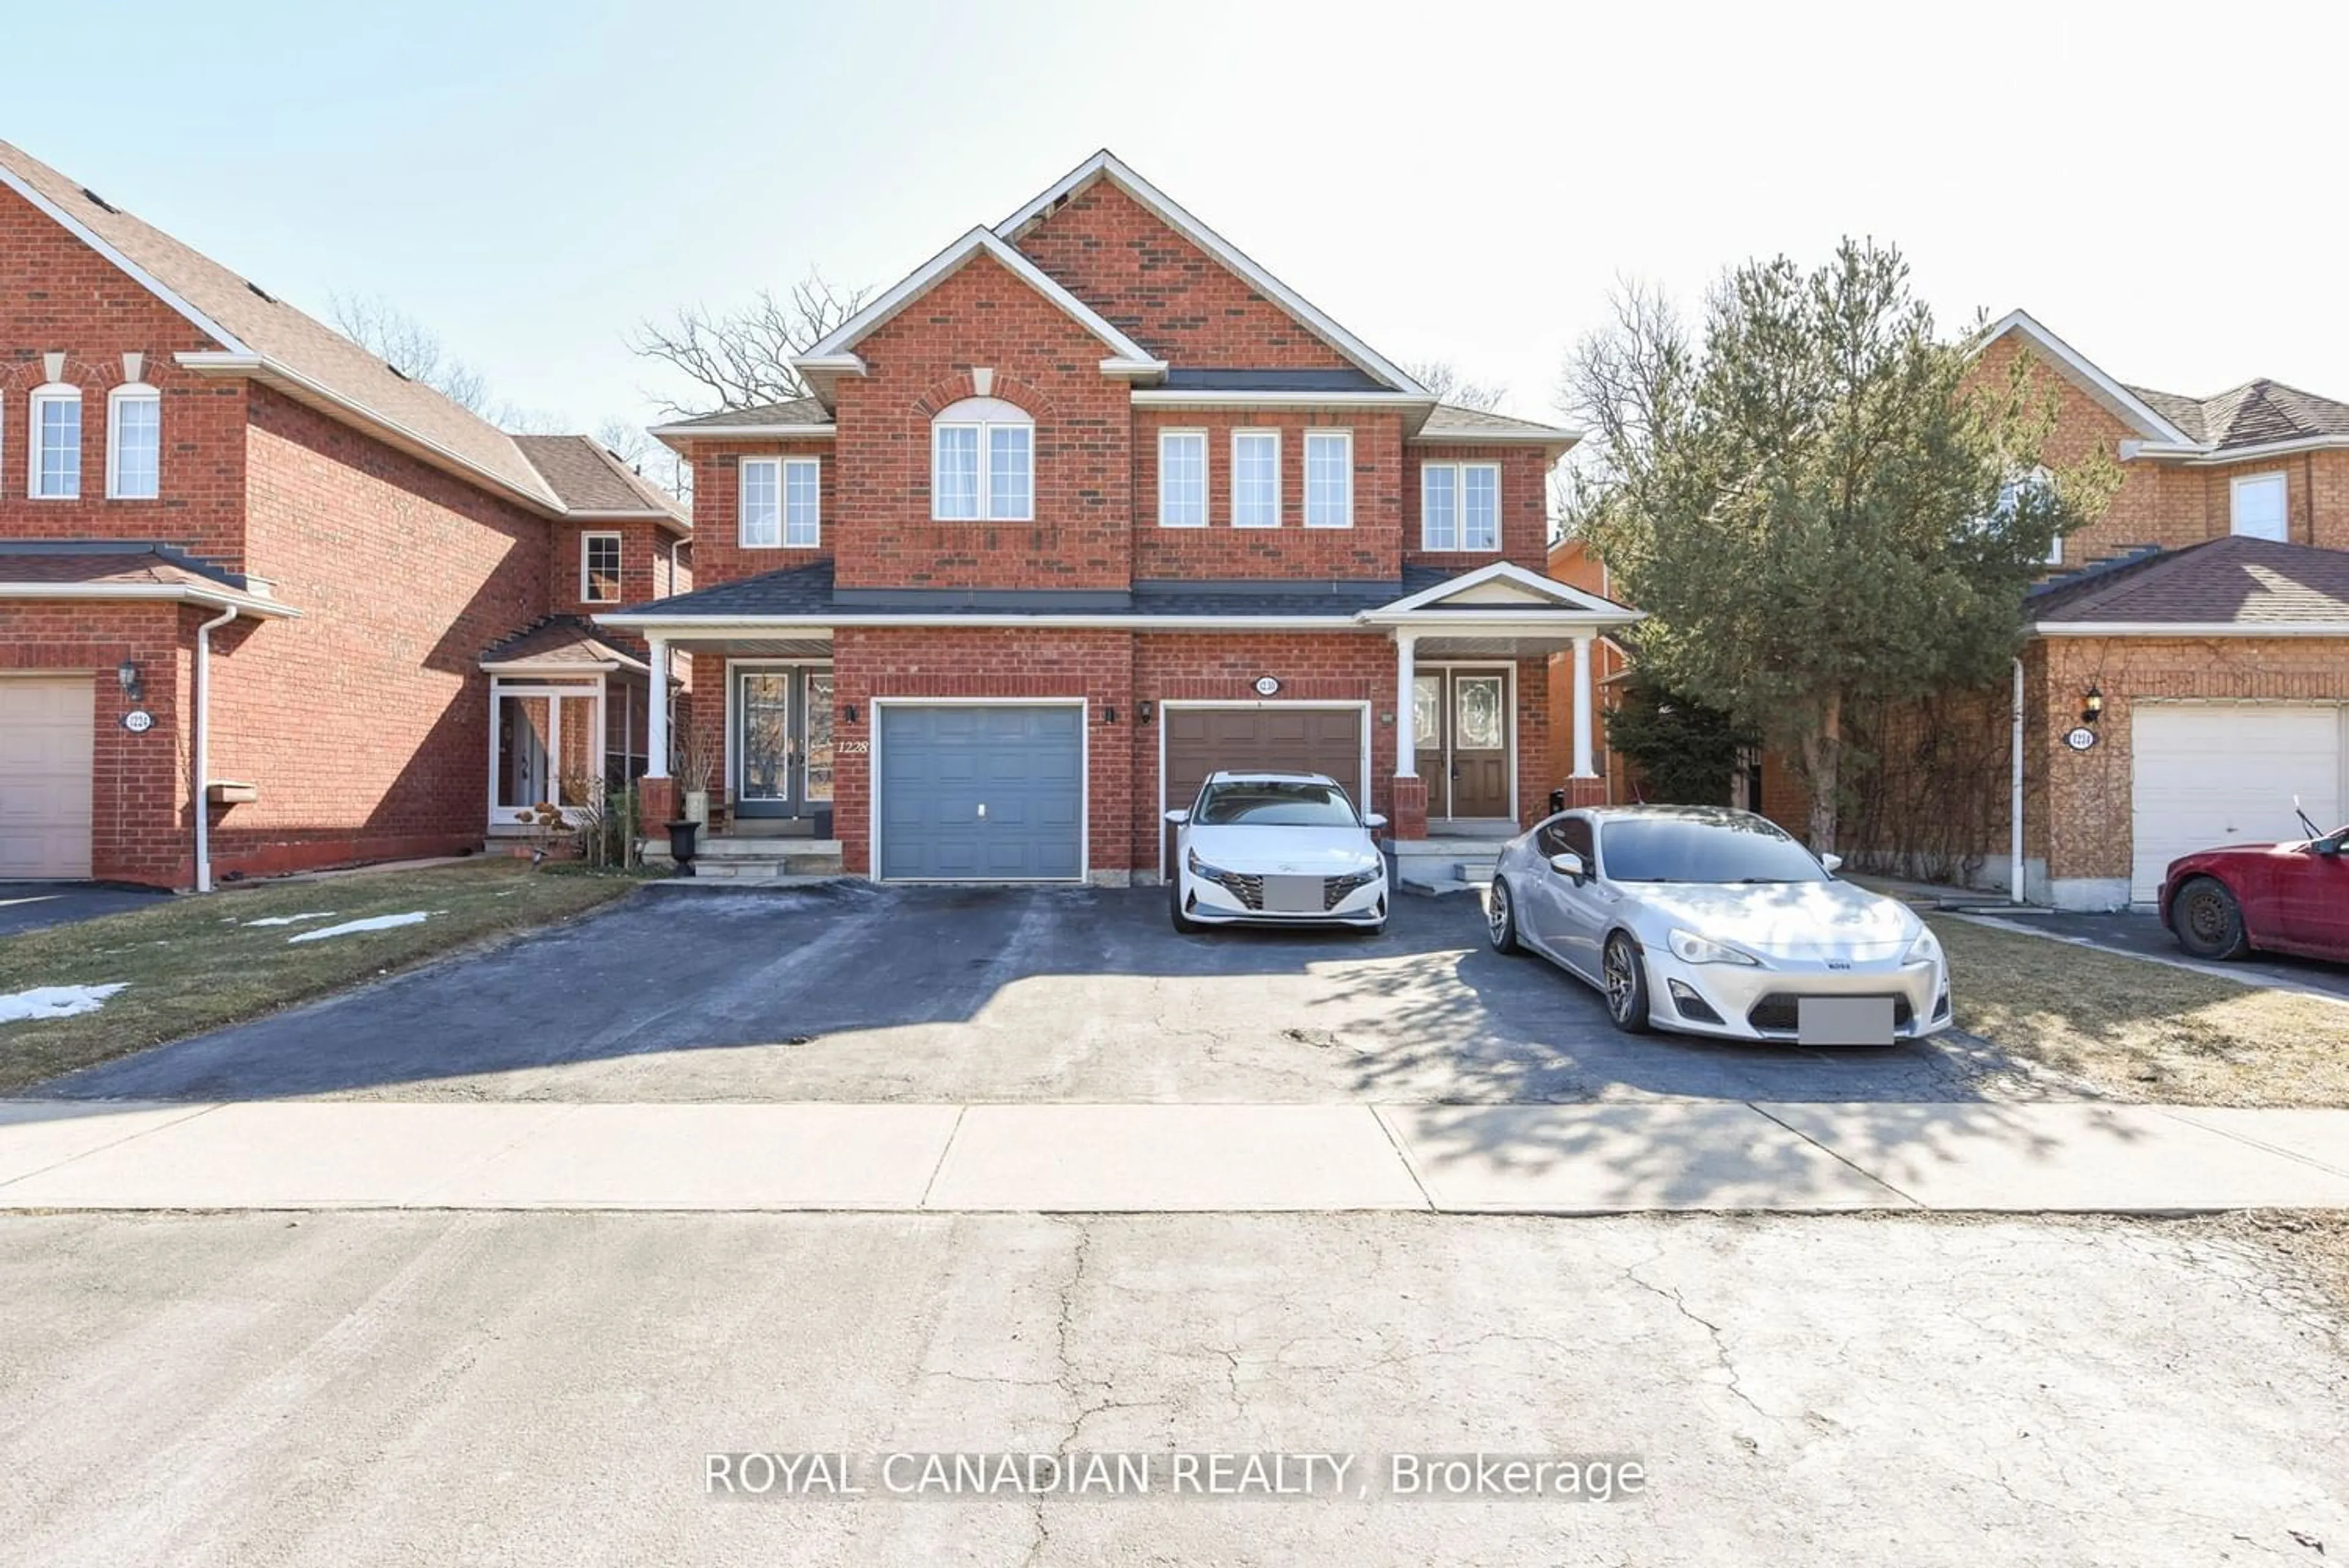 Home with brick exterior material for 1230 Prestonwood Cres, Mississauga Ontario L5V 2V3